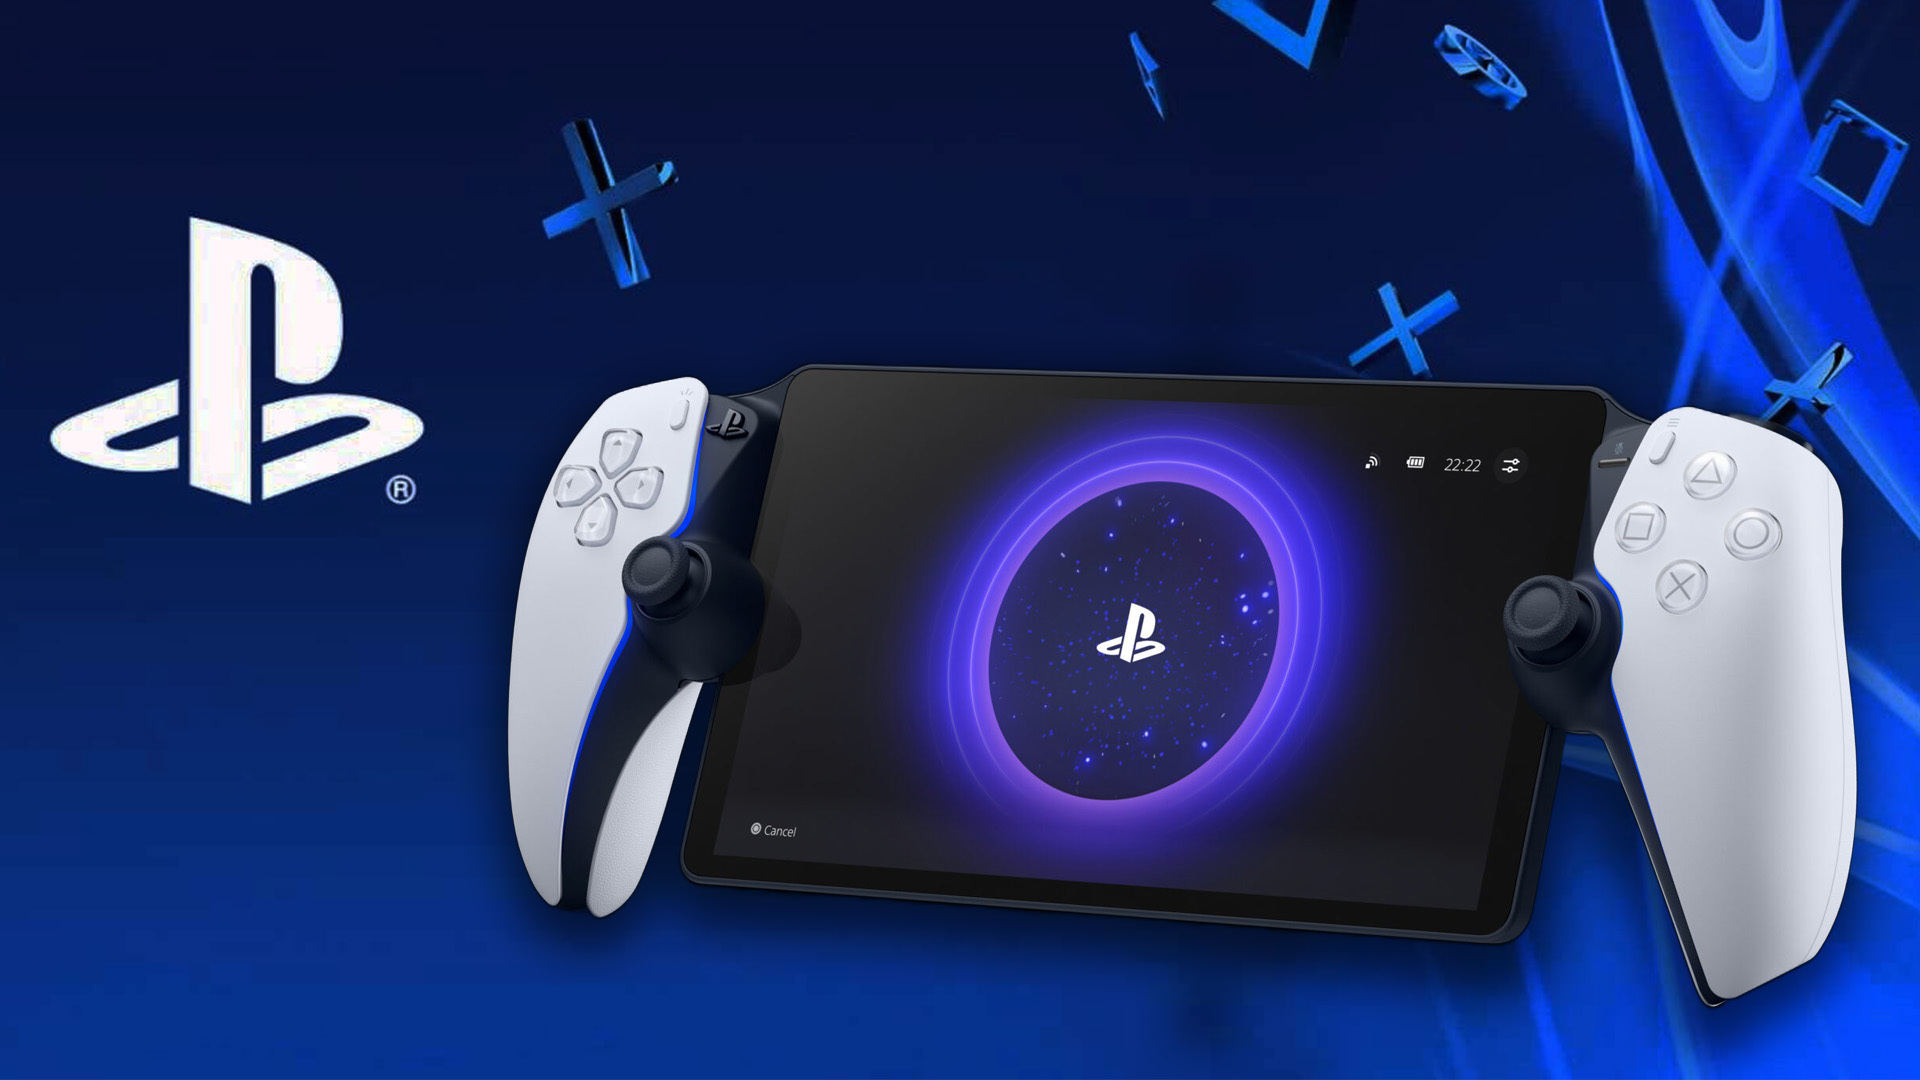 TCMFGames on X: Sony X Batman Deal, PS5 Slim and it's potential  announcement and reveal and Sony confirms their next generation console  again thanks to recent news! Check this one out 